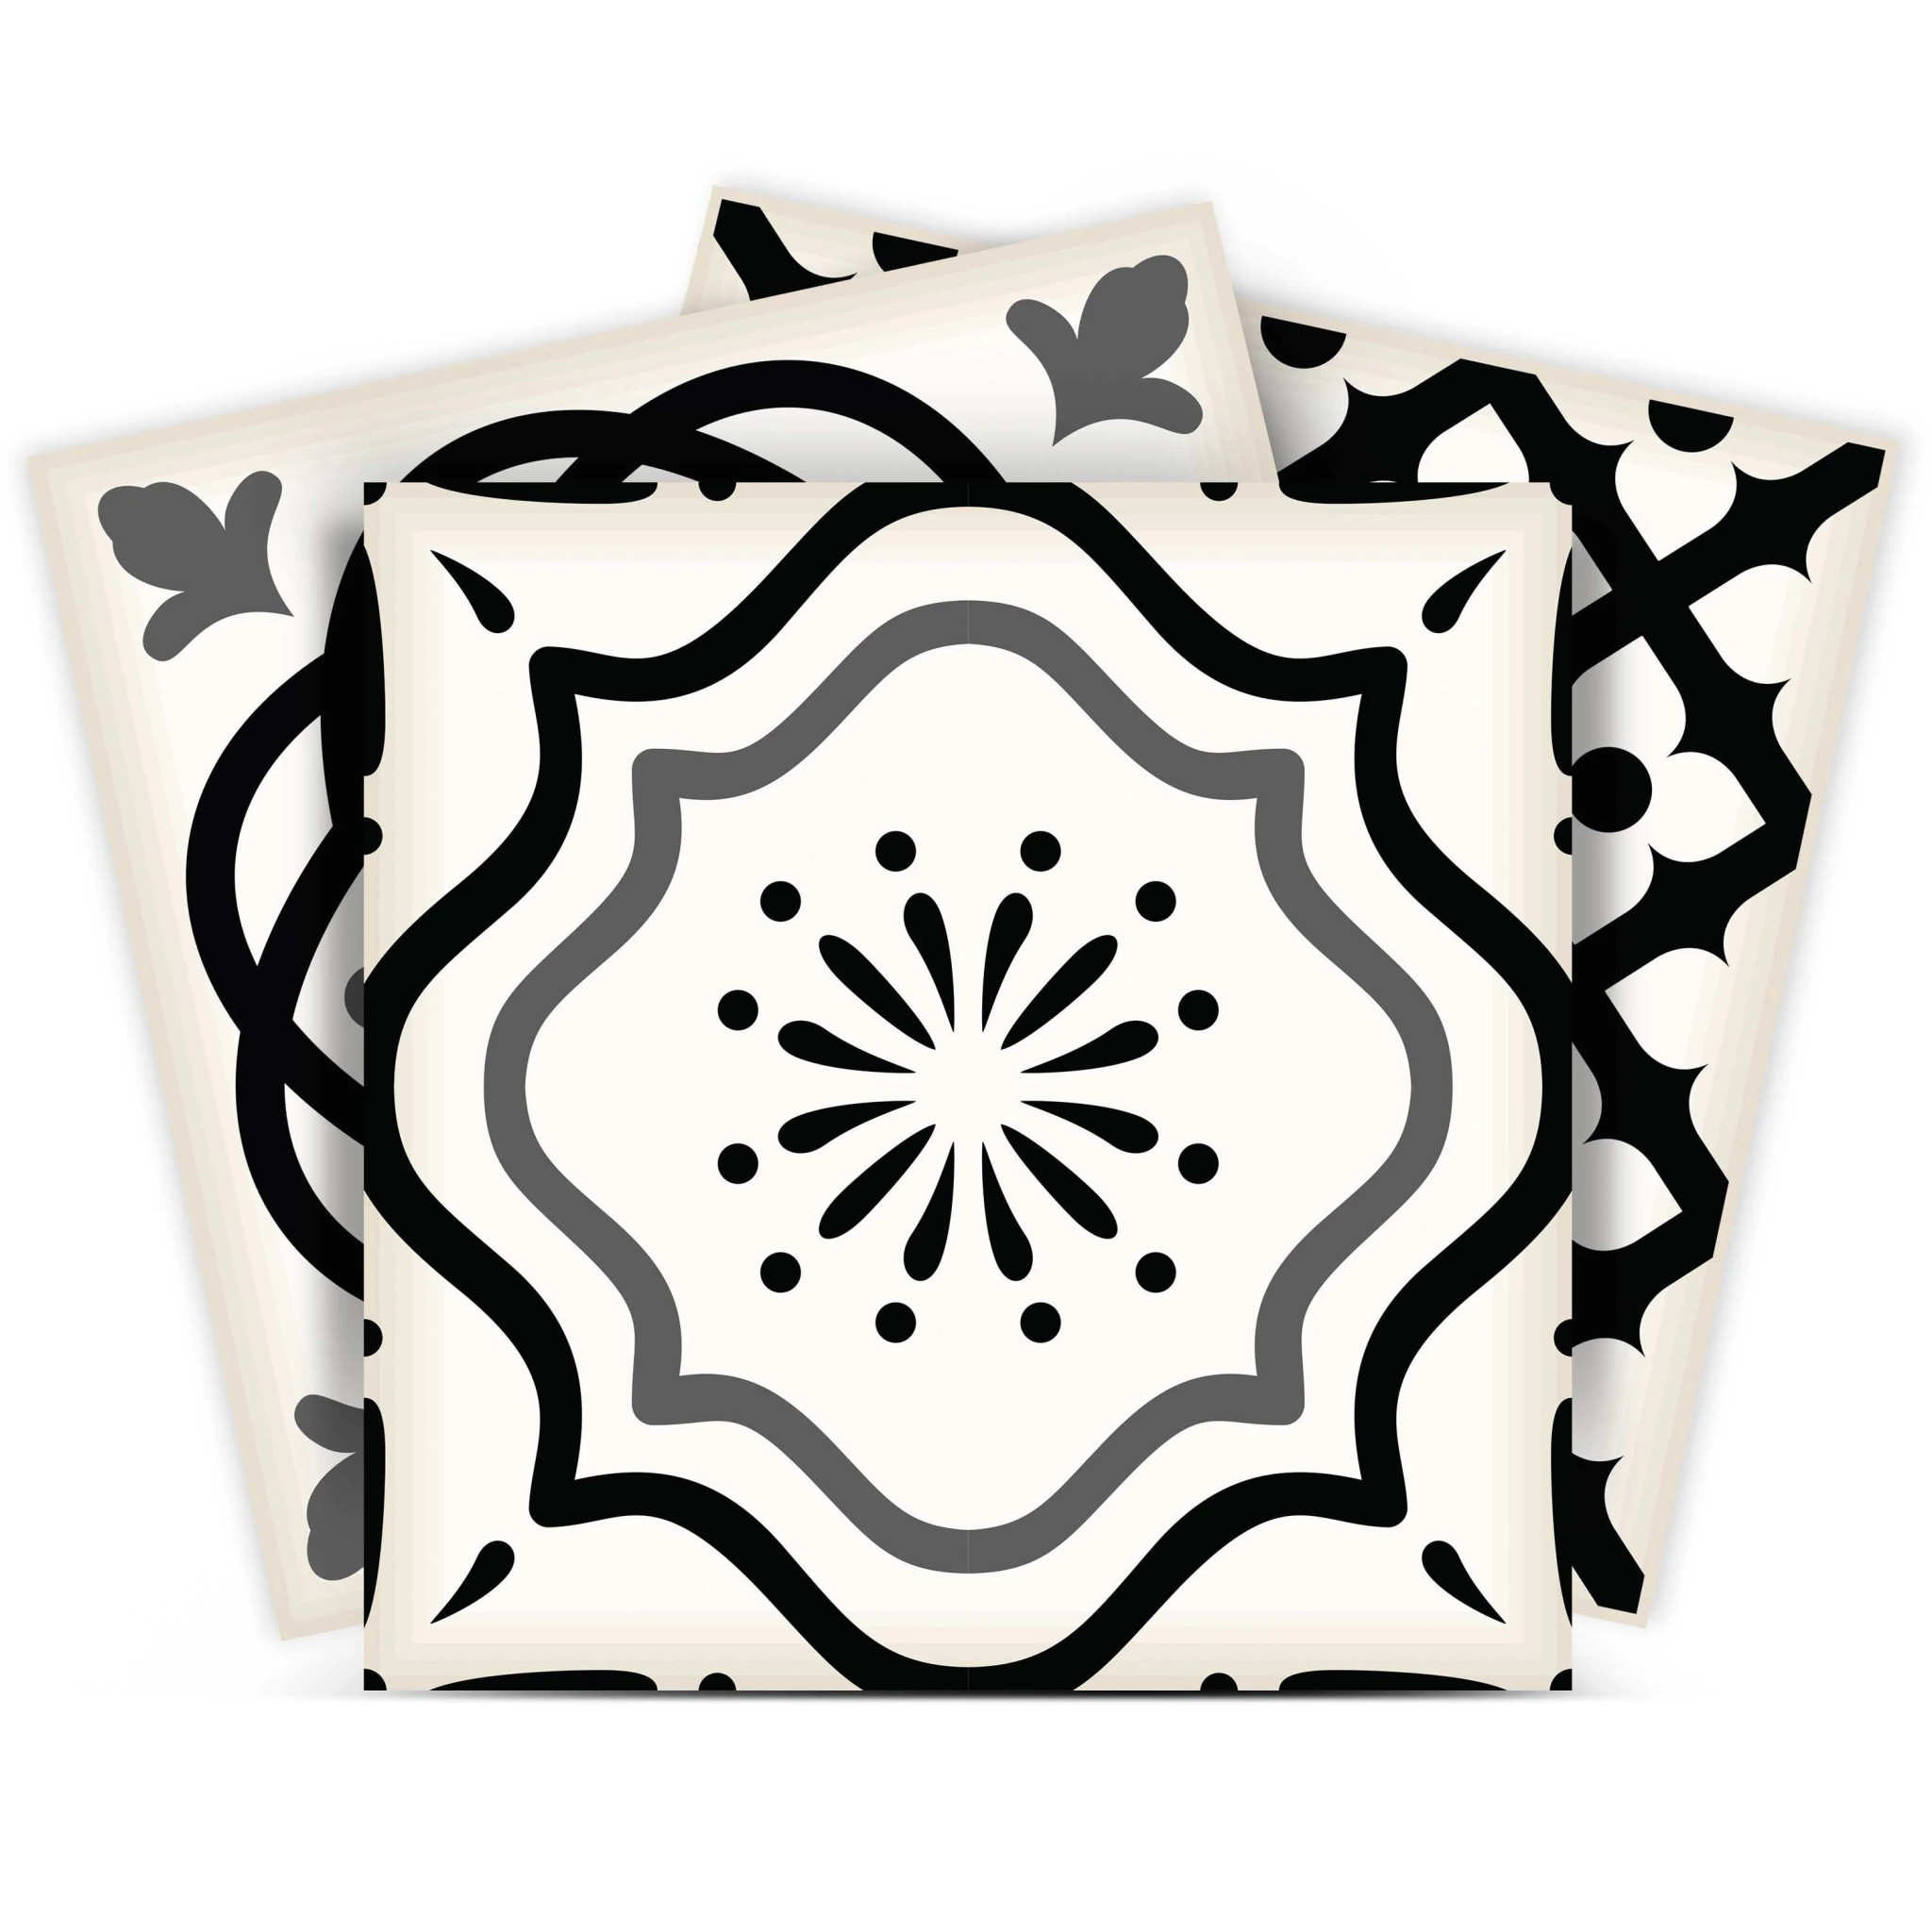 5" X 5" Black and White Multi  Peel and Stick Removable Tiles-399861-1